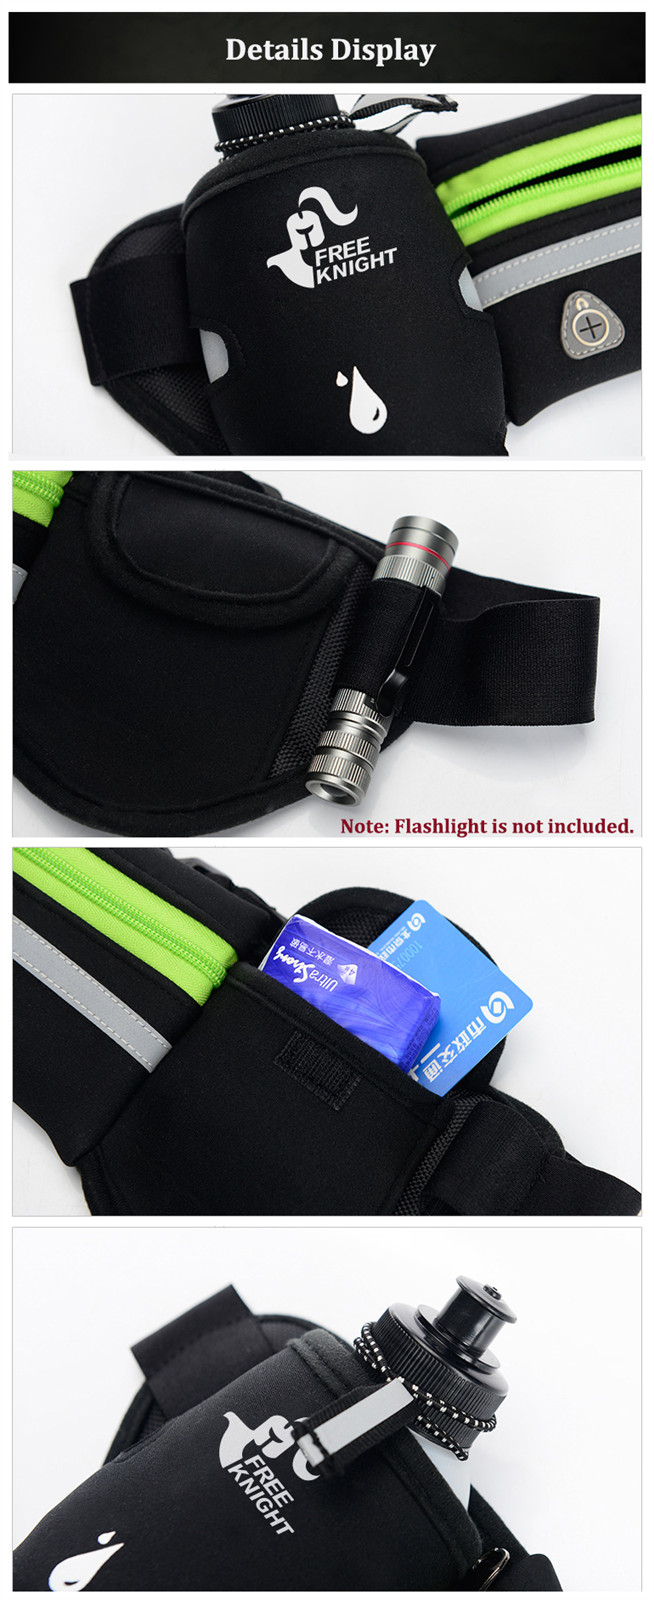 Free-Knight-Sports-Reflective-Waist-Bag-Bottle-Pouch-iPhone-7-Plus-Holder-With-Earphone-Hole-1120378-10